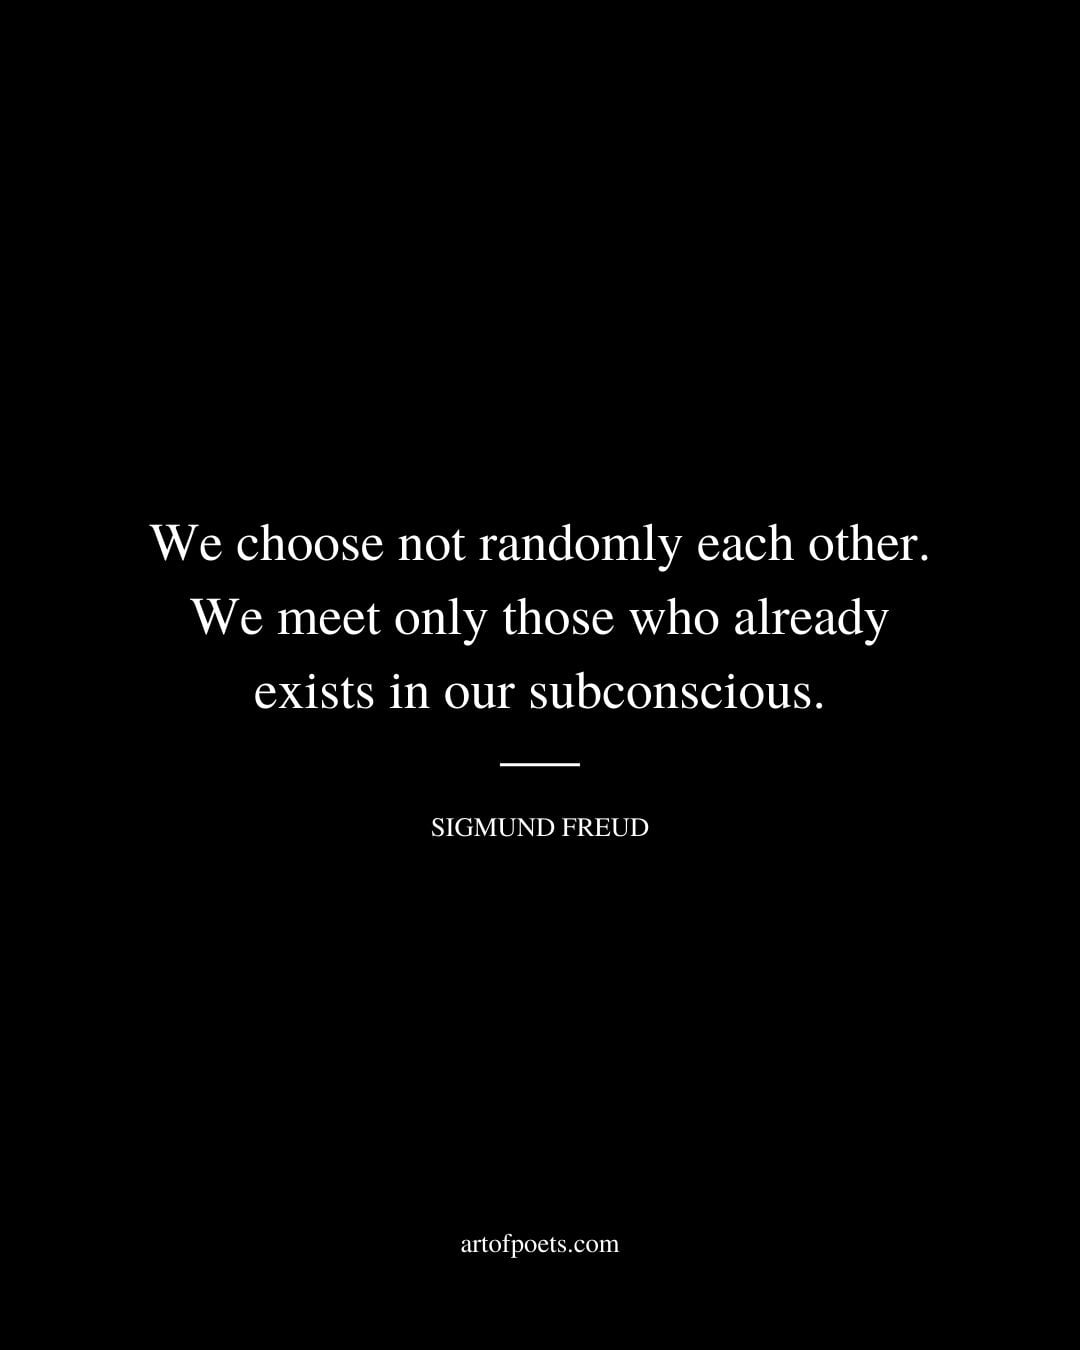 We choose not randomly each other. We meet only those who already exists in our subconscious